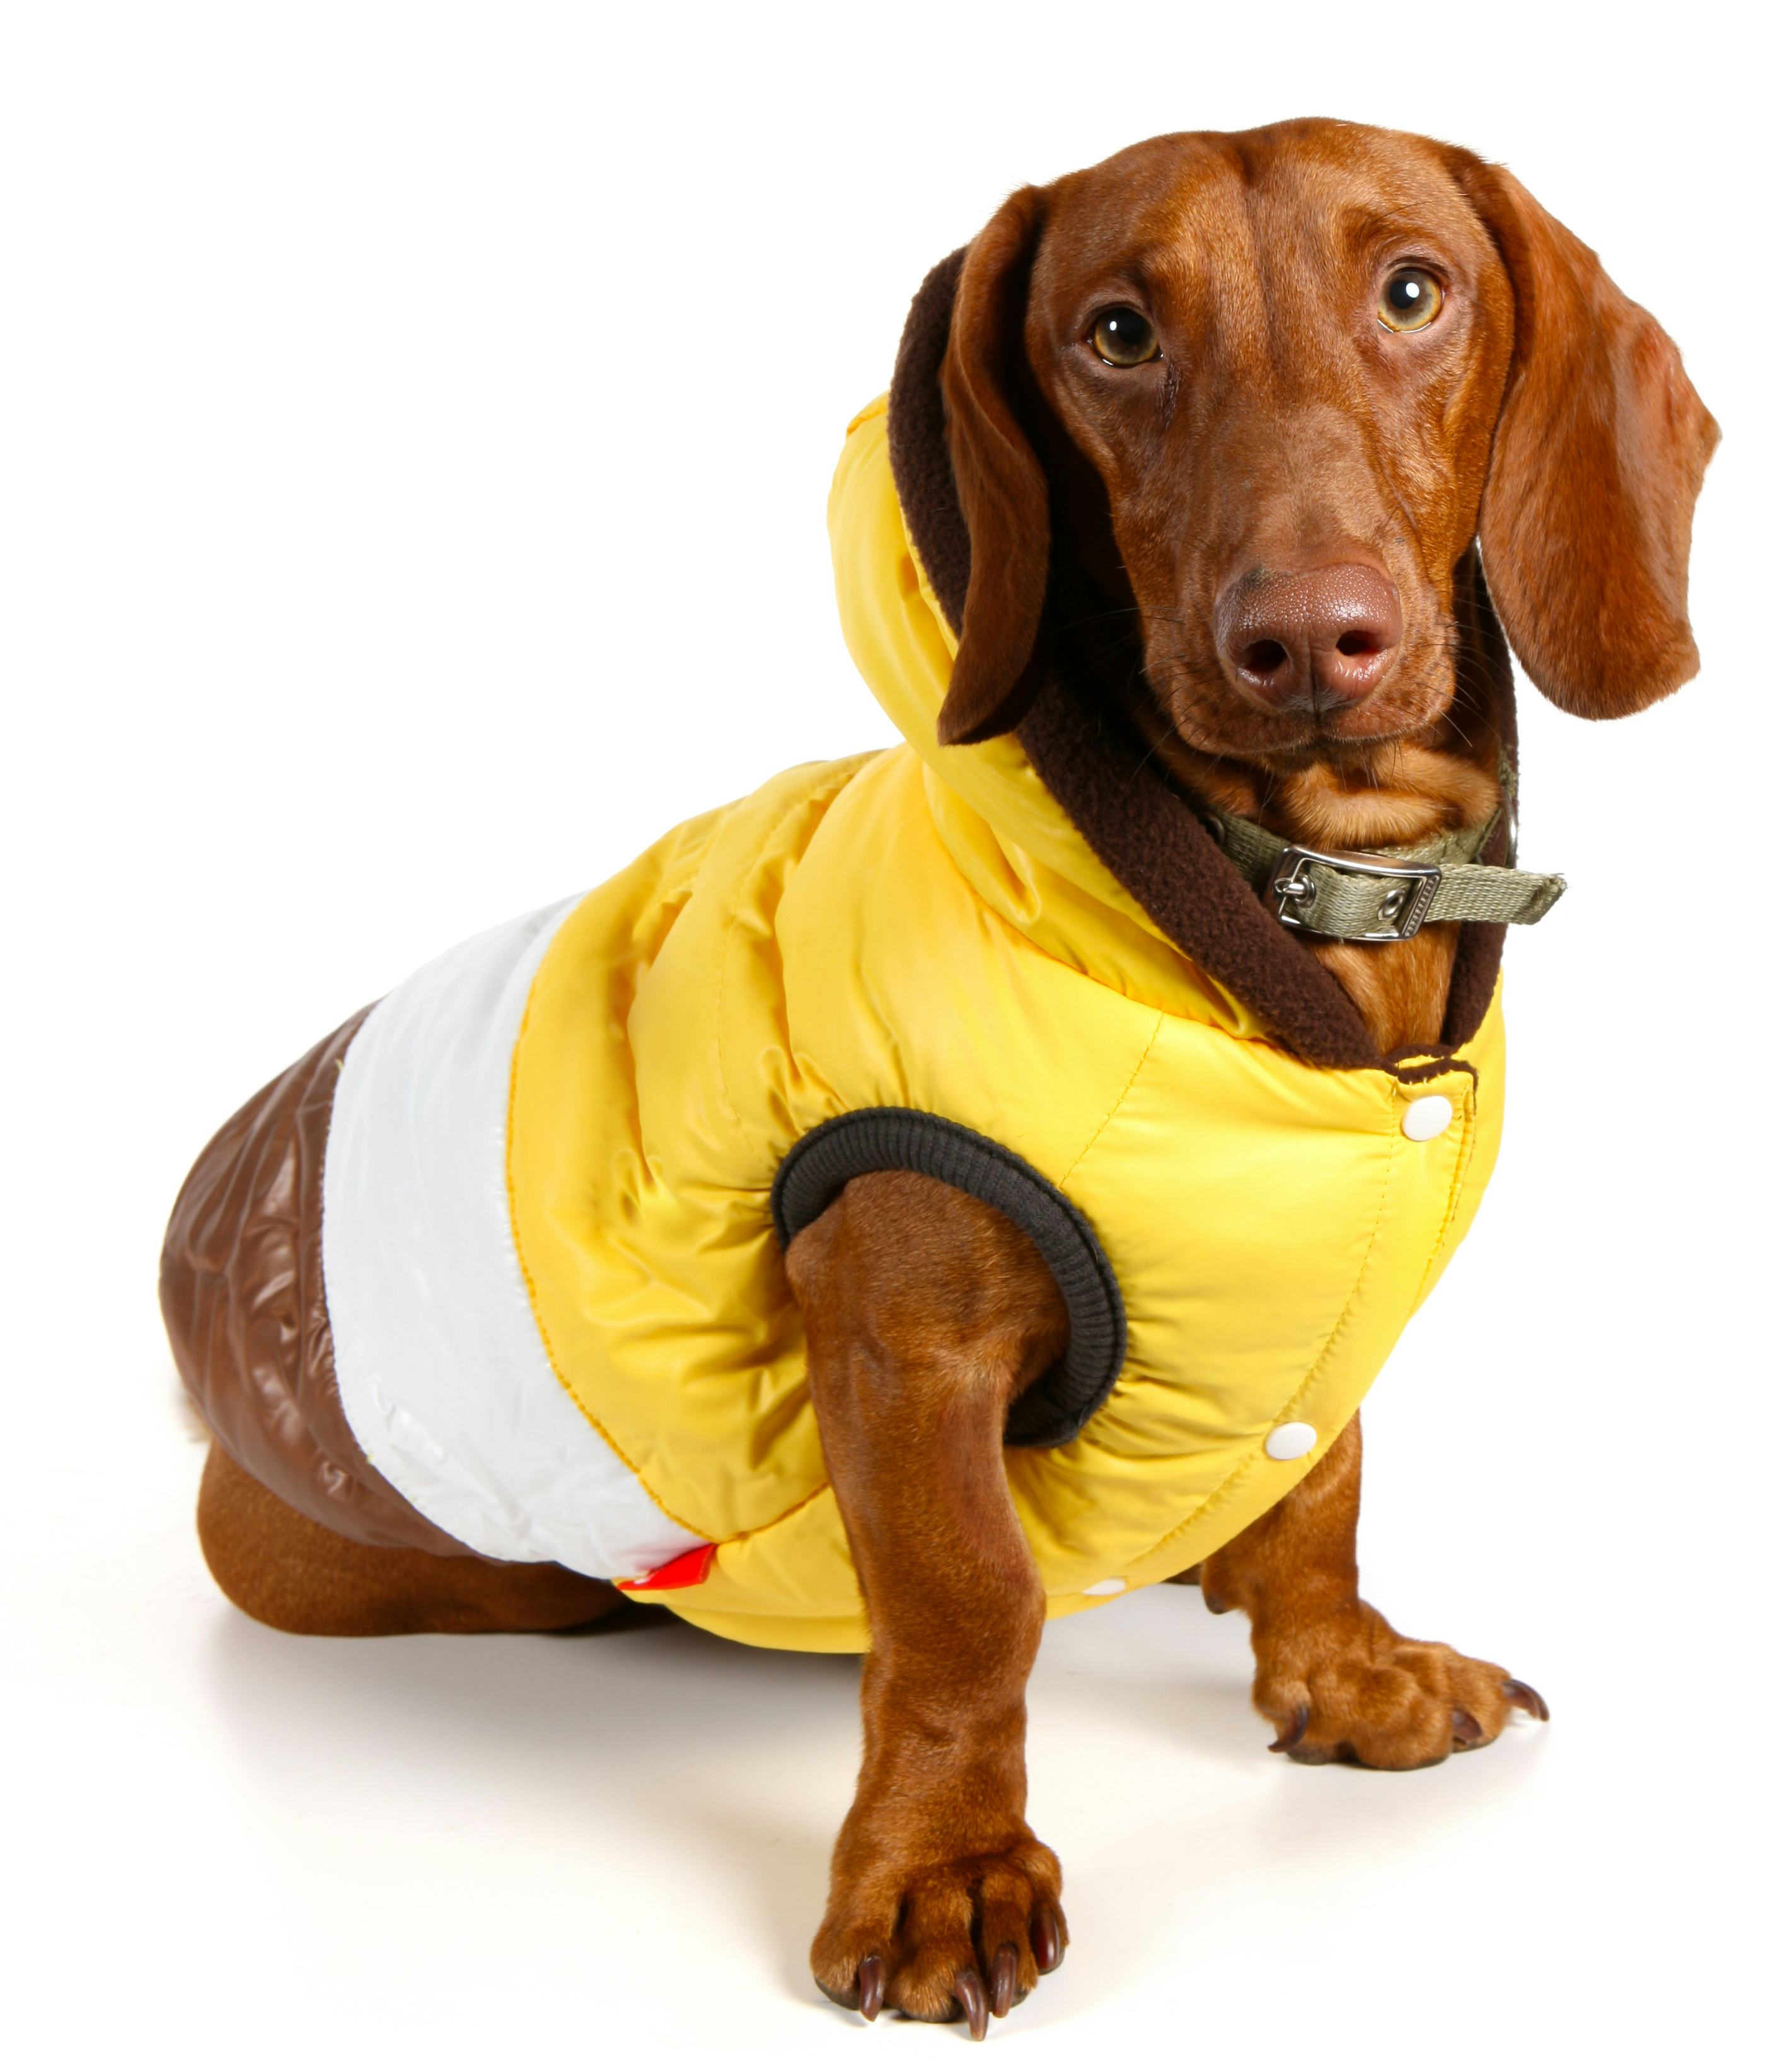 brown puppy with big ears and a yellow jacket